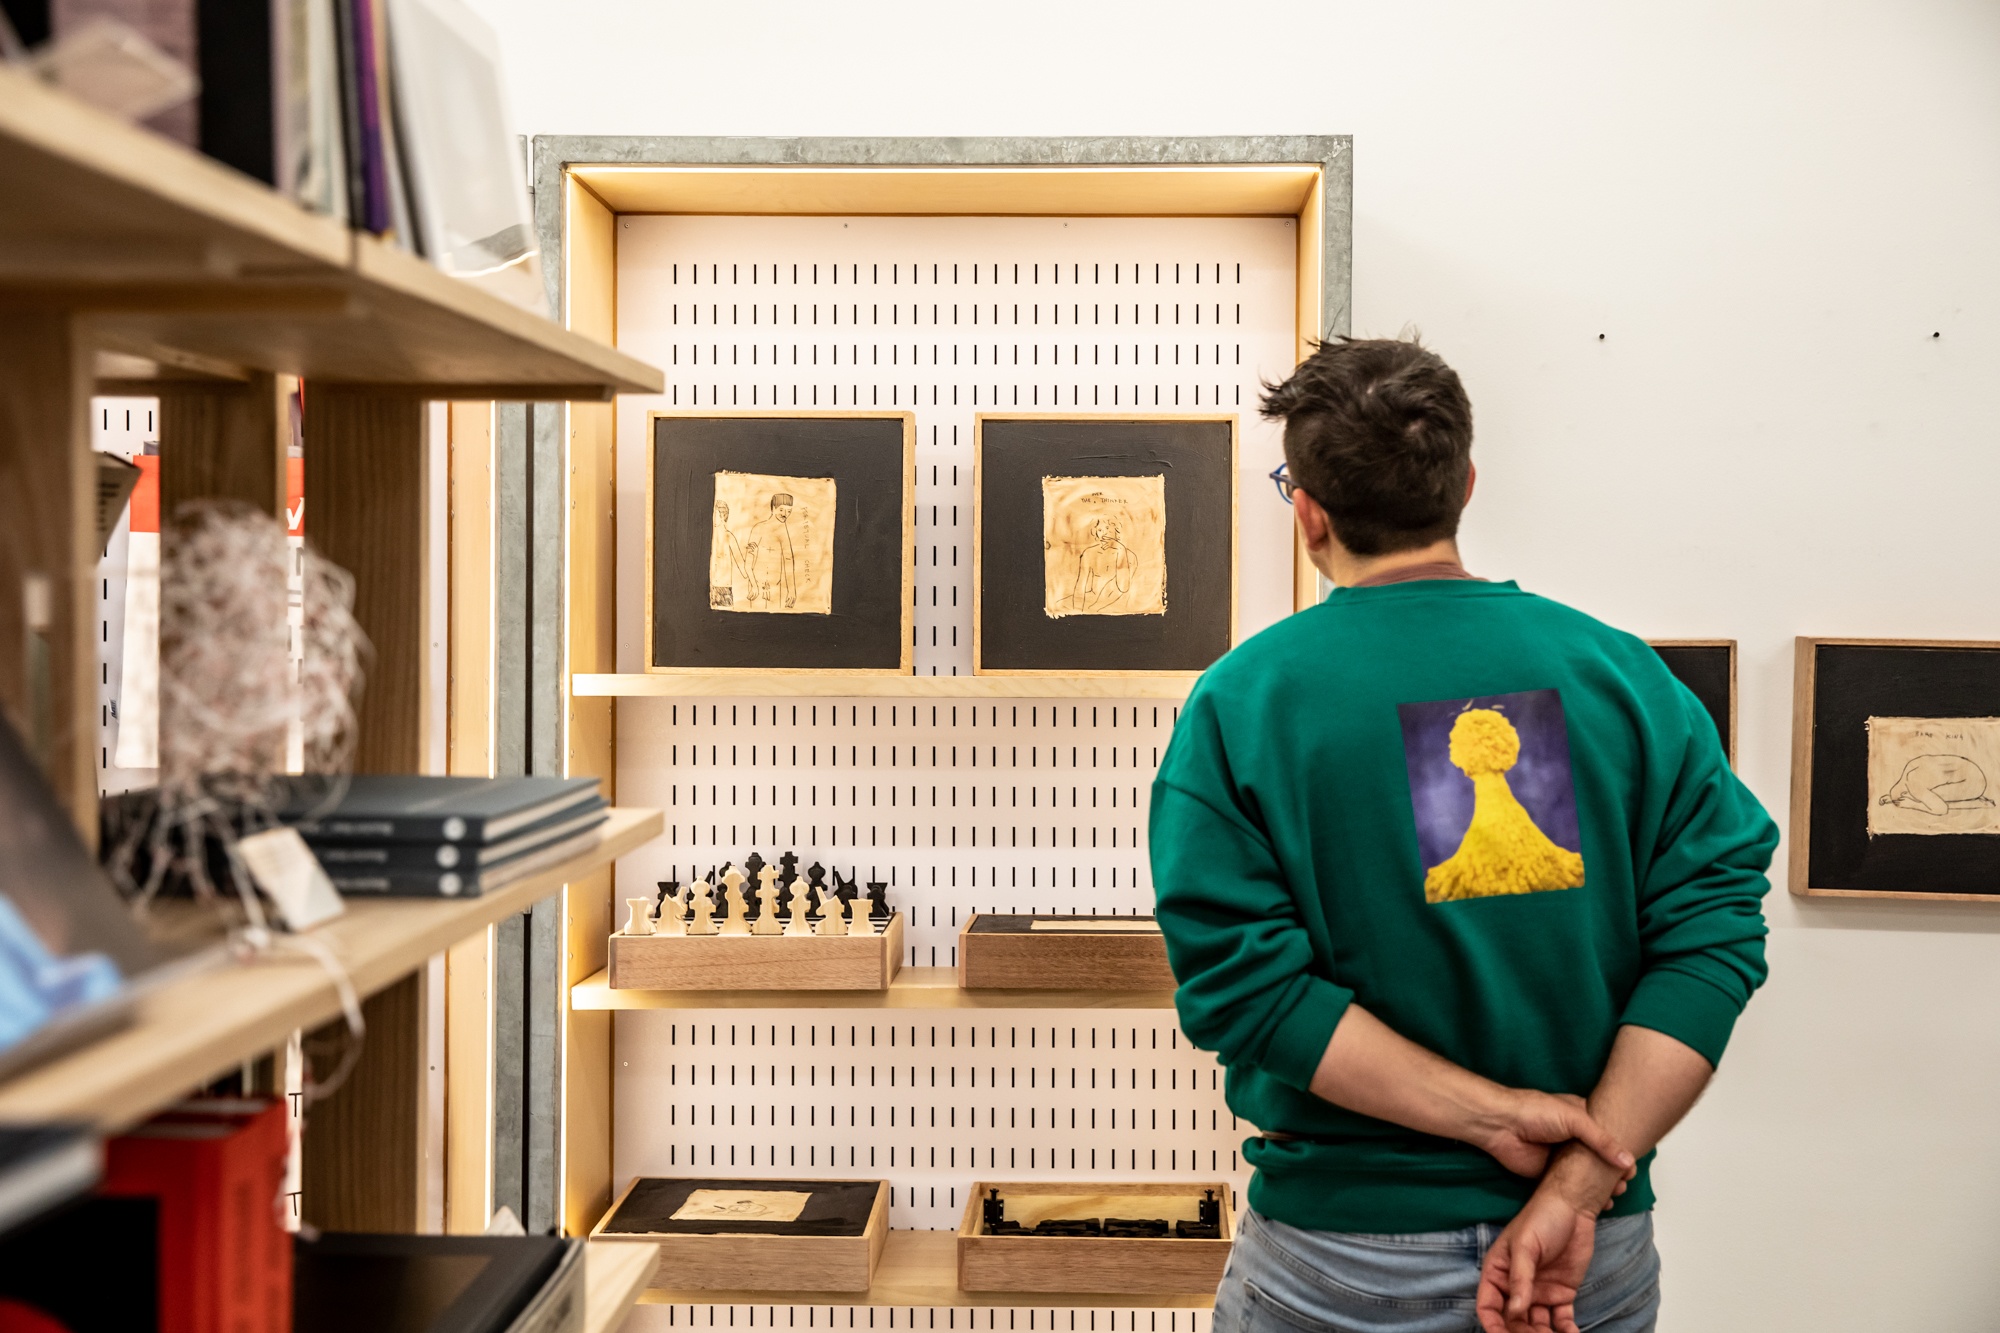 Event photograph from the launch of Brett Seiler’s chess set in A4’s Proto museum shop. A display case against the shop wall holds multiple wooden chess sets with paintings on the bottom of each set. An attendee faces the display with their back to the photographer.
